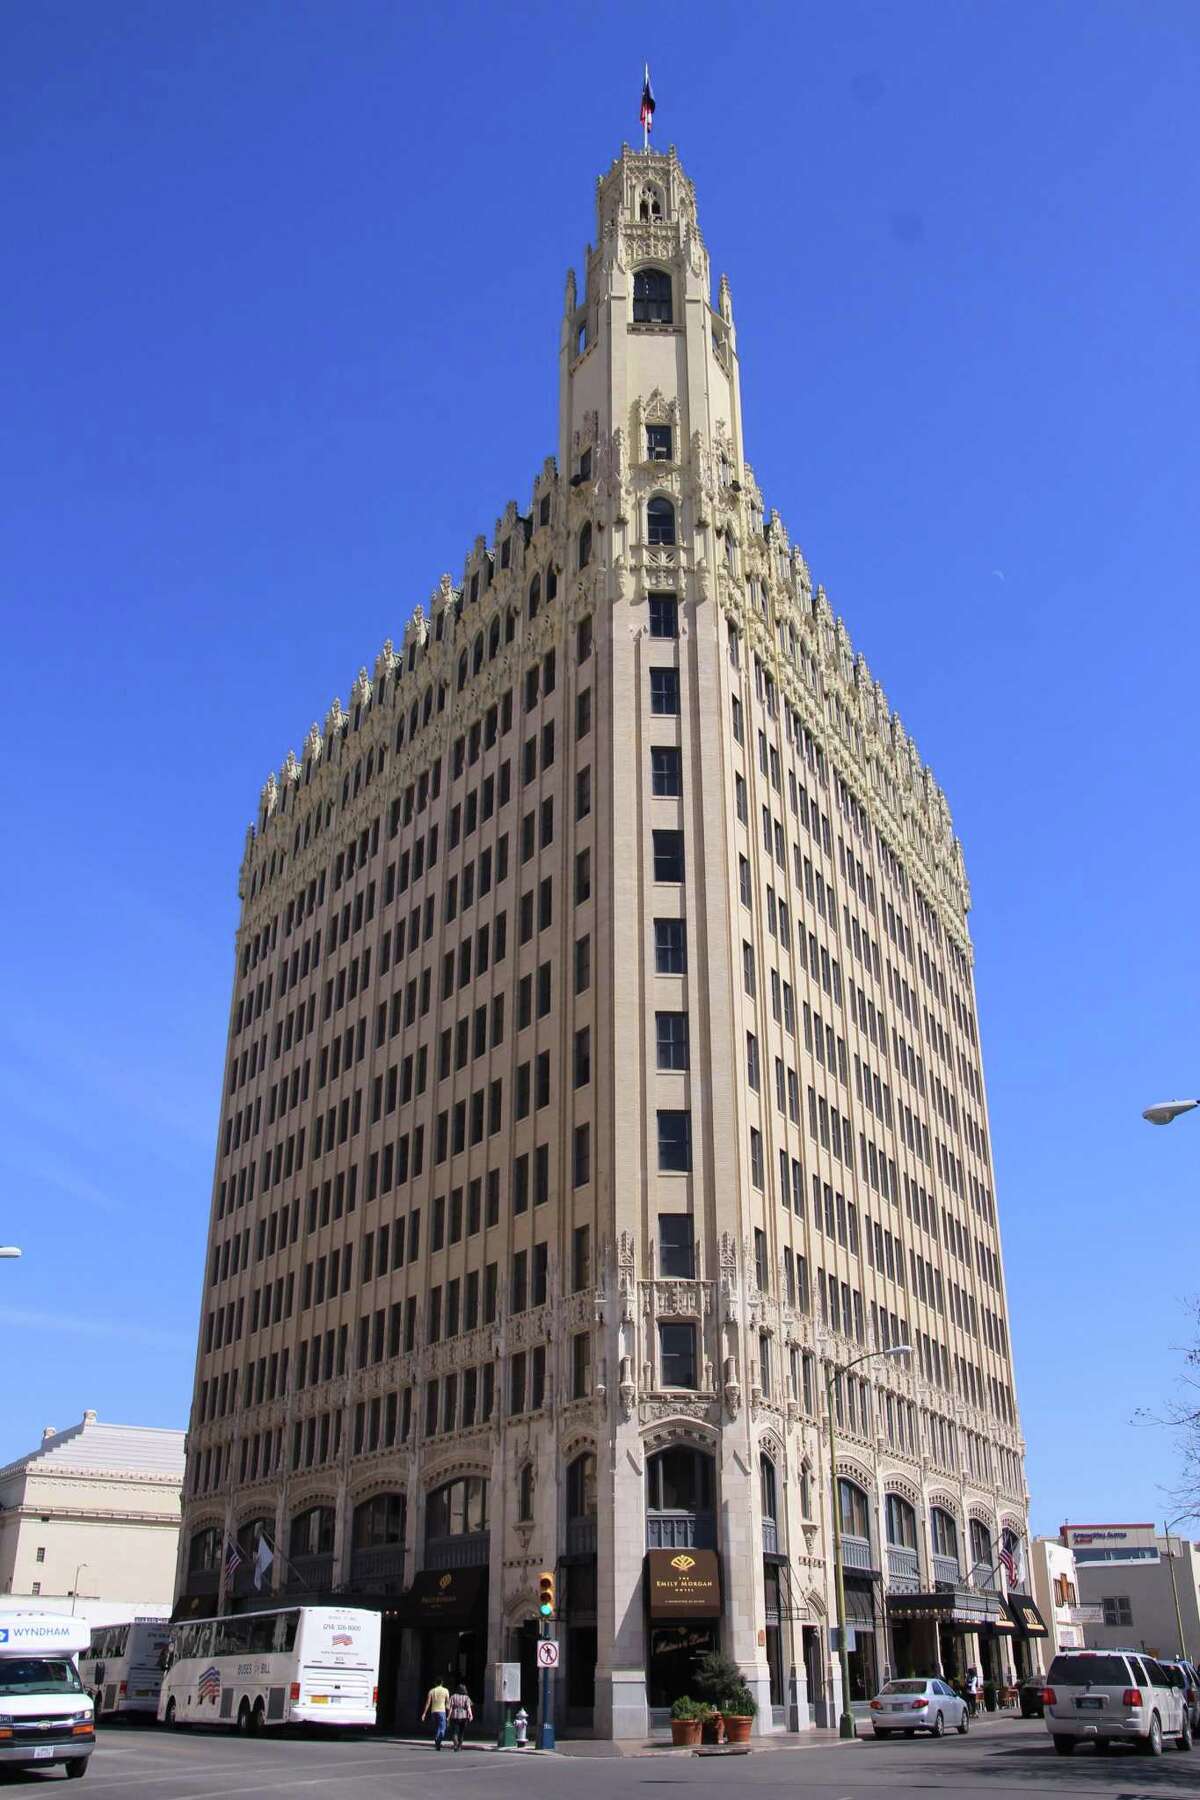 The Tower Life, Emily Morgan (pictured), and Express-News buildings were all constructed during a building boom of the 1920s.